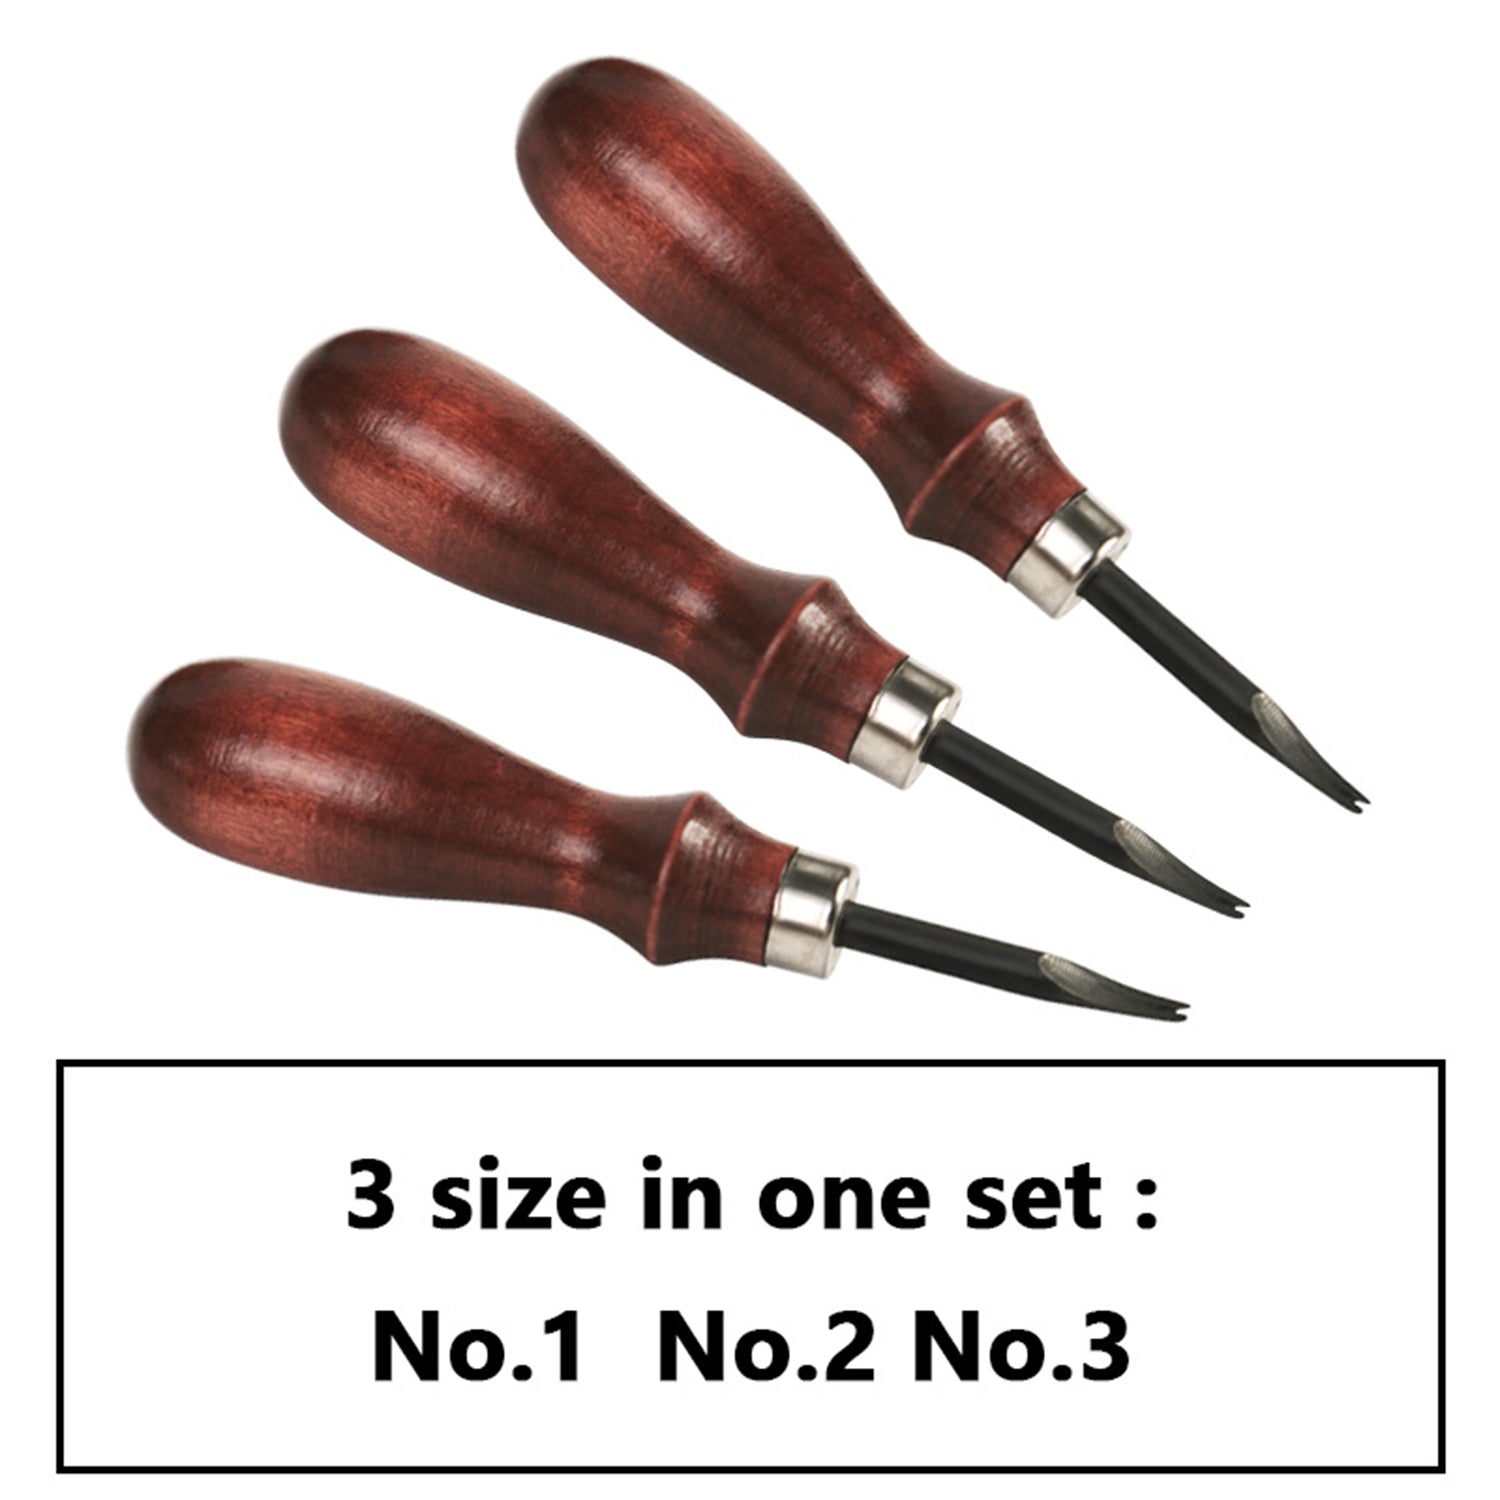 Ounona Leather Beveler Tool Tools Bevel Beveling DIY Groover Edger Skiving Ather Craft Stitching Wood Handle